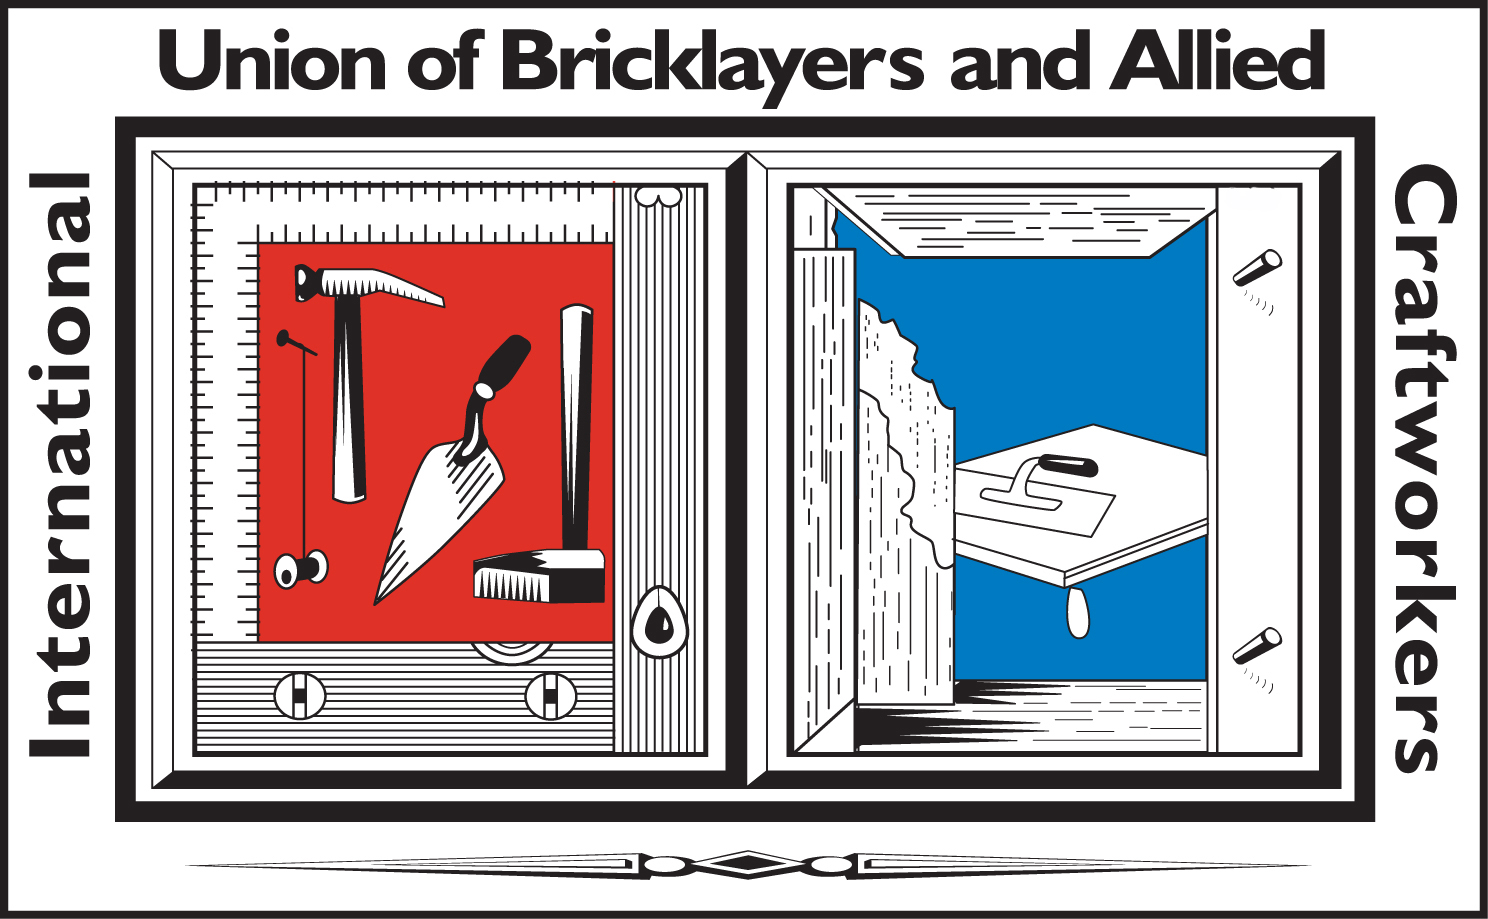 Union of Bricklayers and Allied